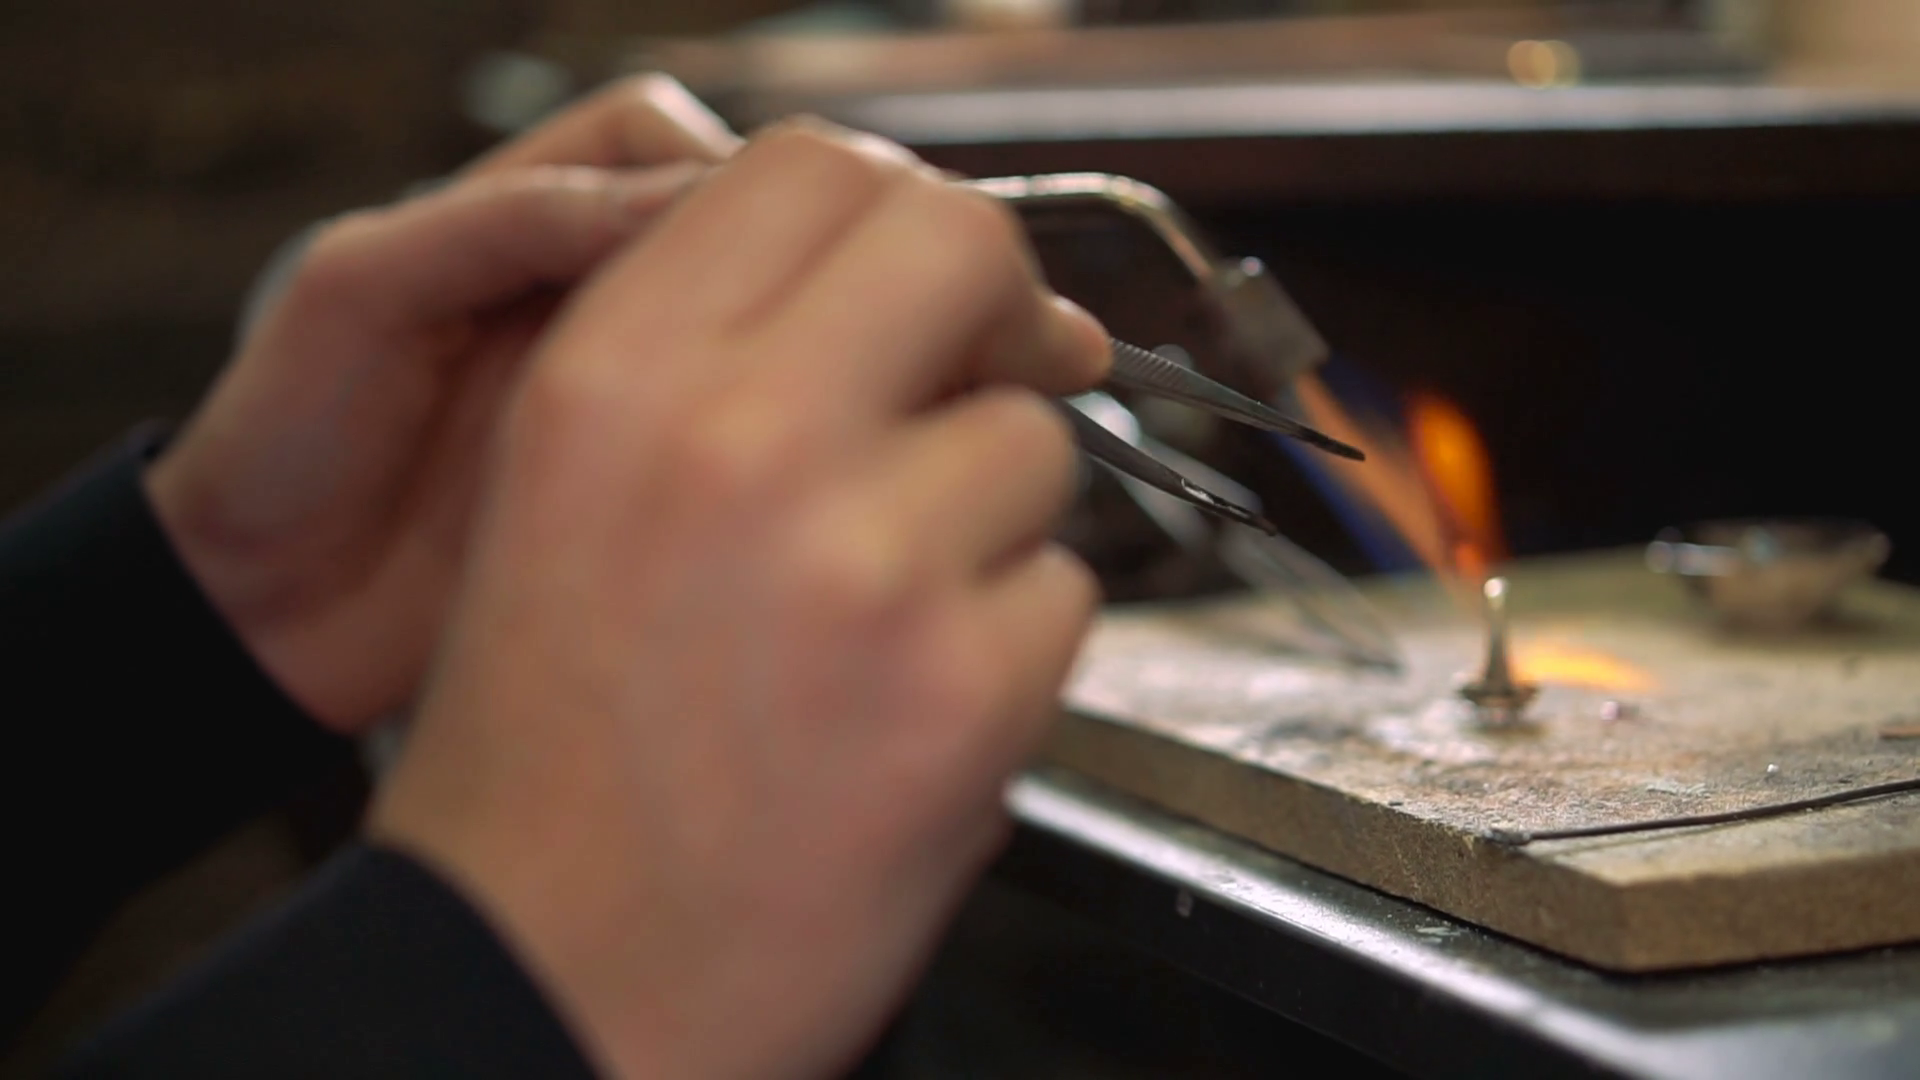 Process annealing a silver ring using a soldering iron in his hand ...